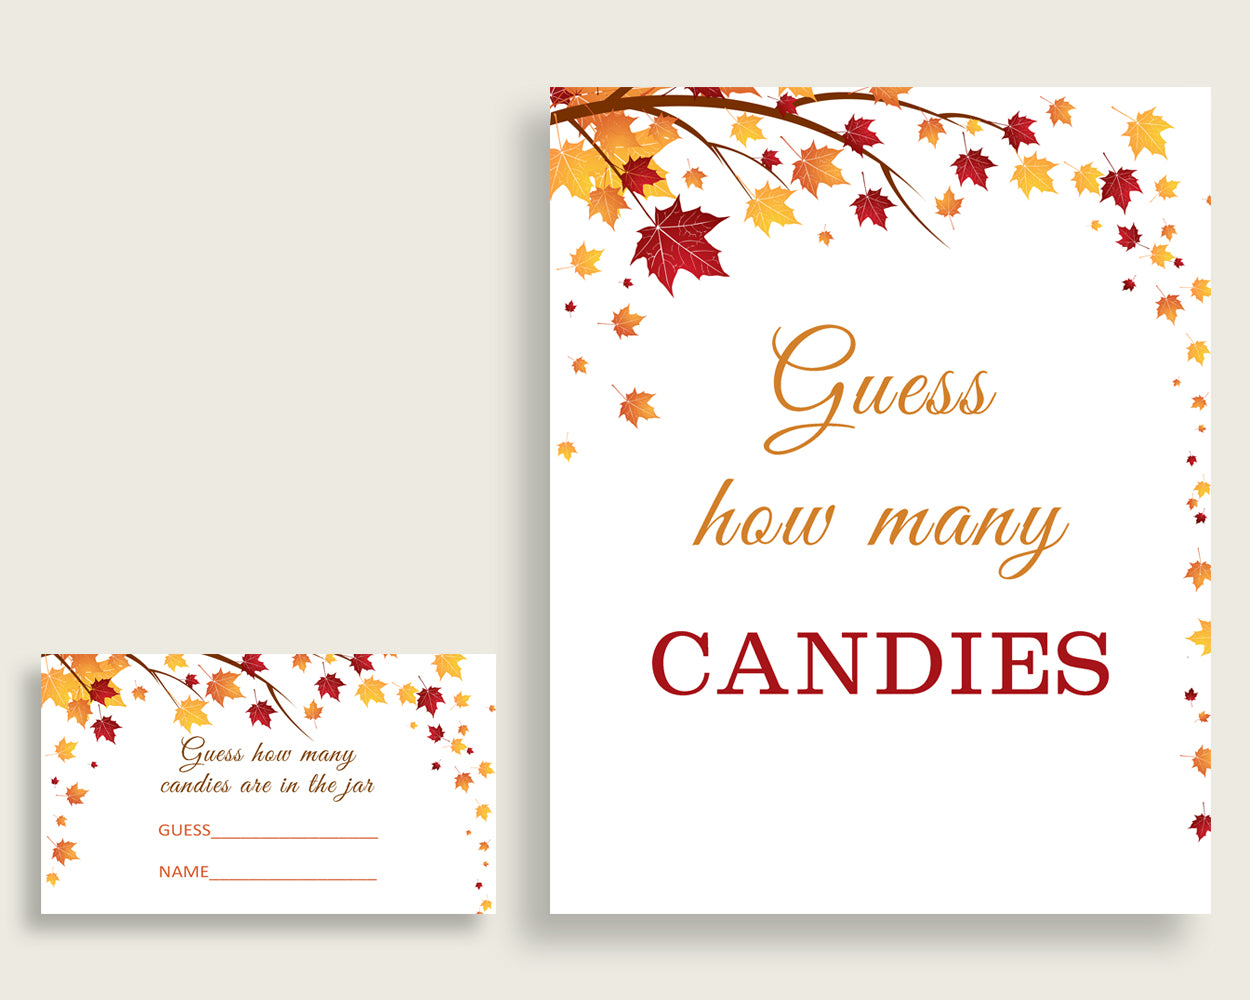 Candy Guessing Game Bridal Shower Candy Guessing Game Fall Bridal Shower Candy Guessing Game Bridal Shower Autumn Candy Guessing Game YCZ2S